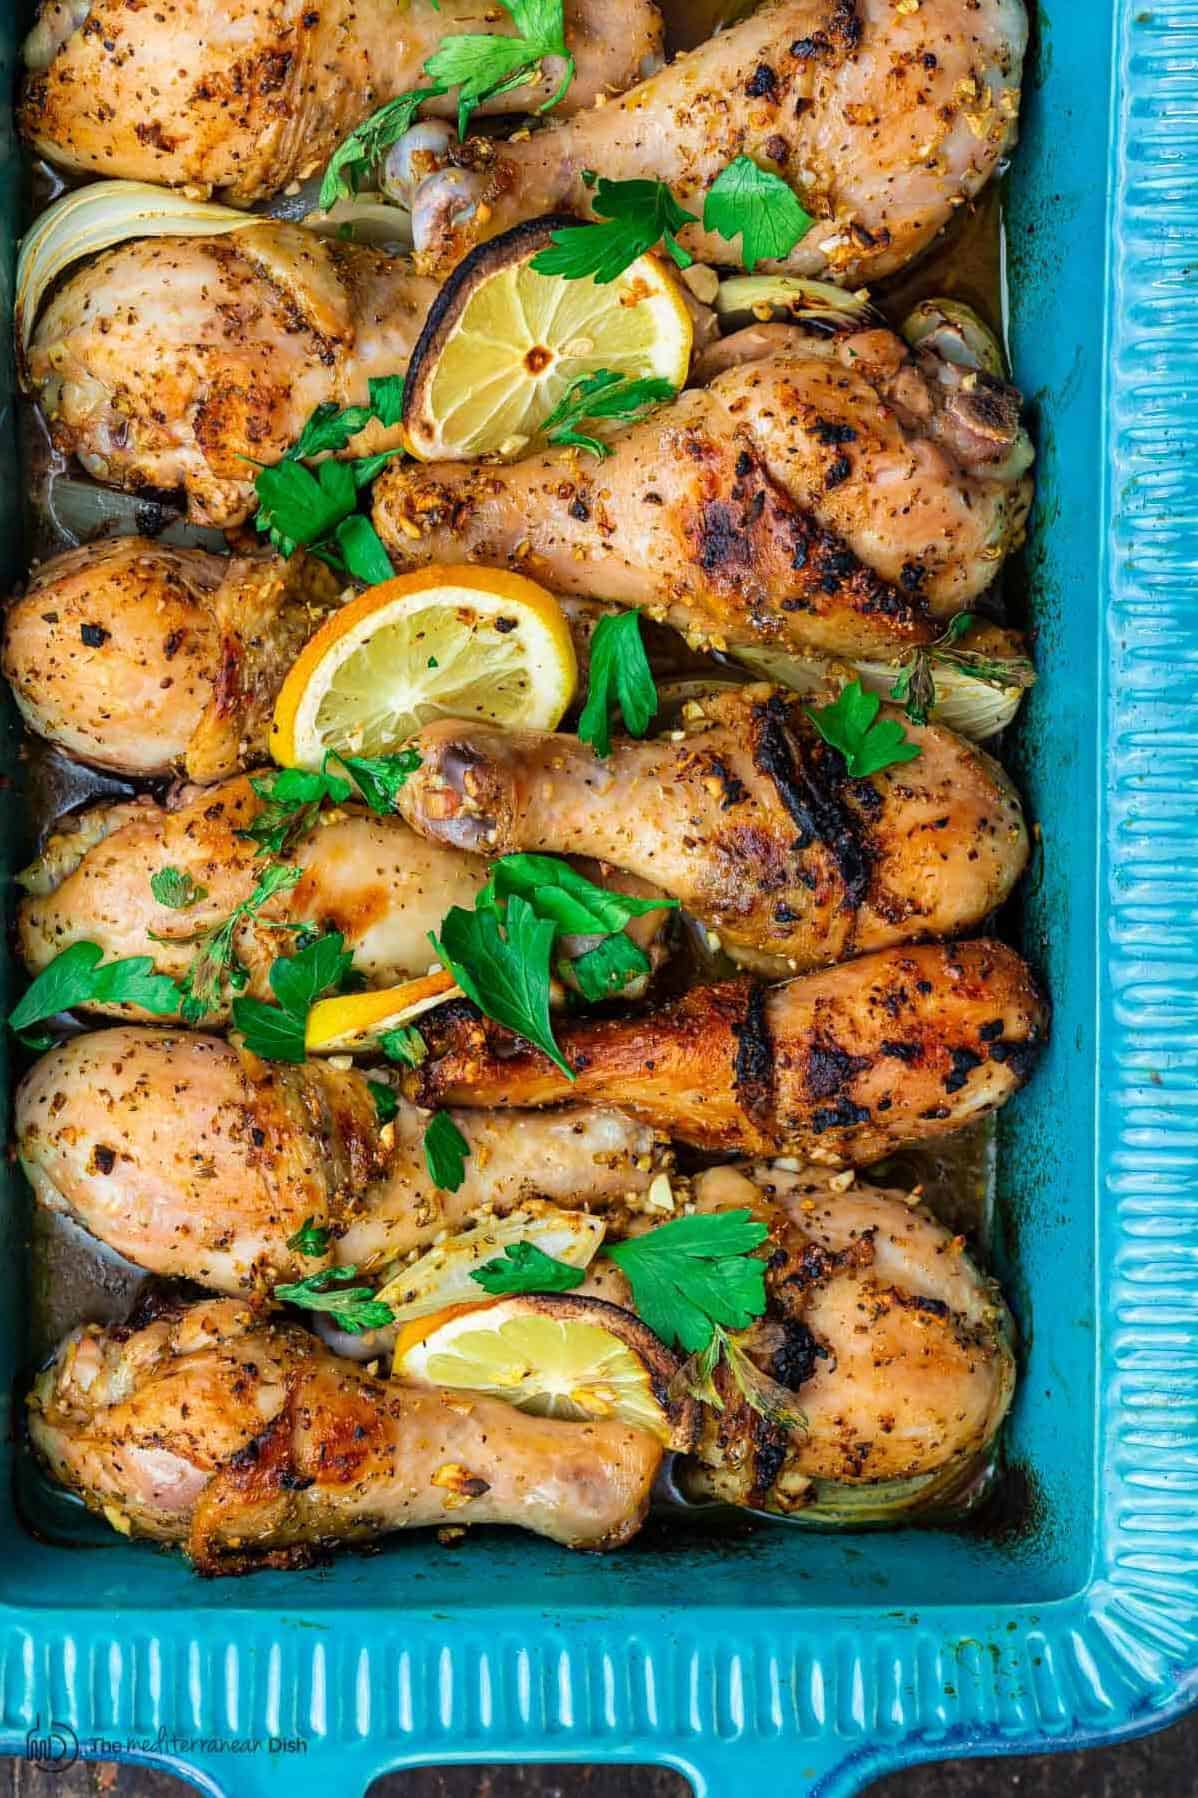  Give your chicken some extra love with a sprinkle of fresh rosemary and thyme.